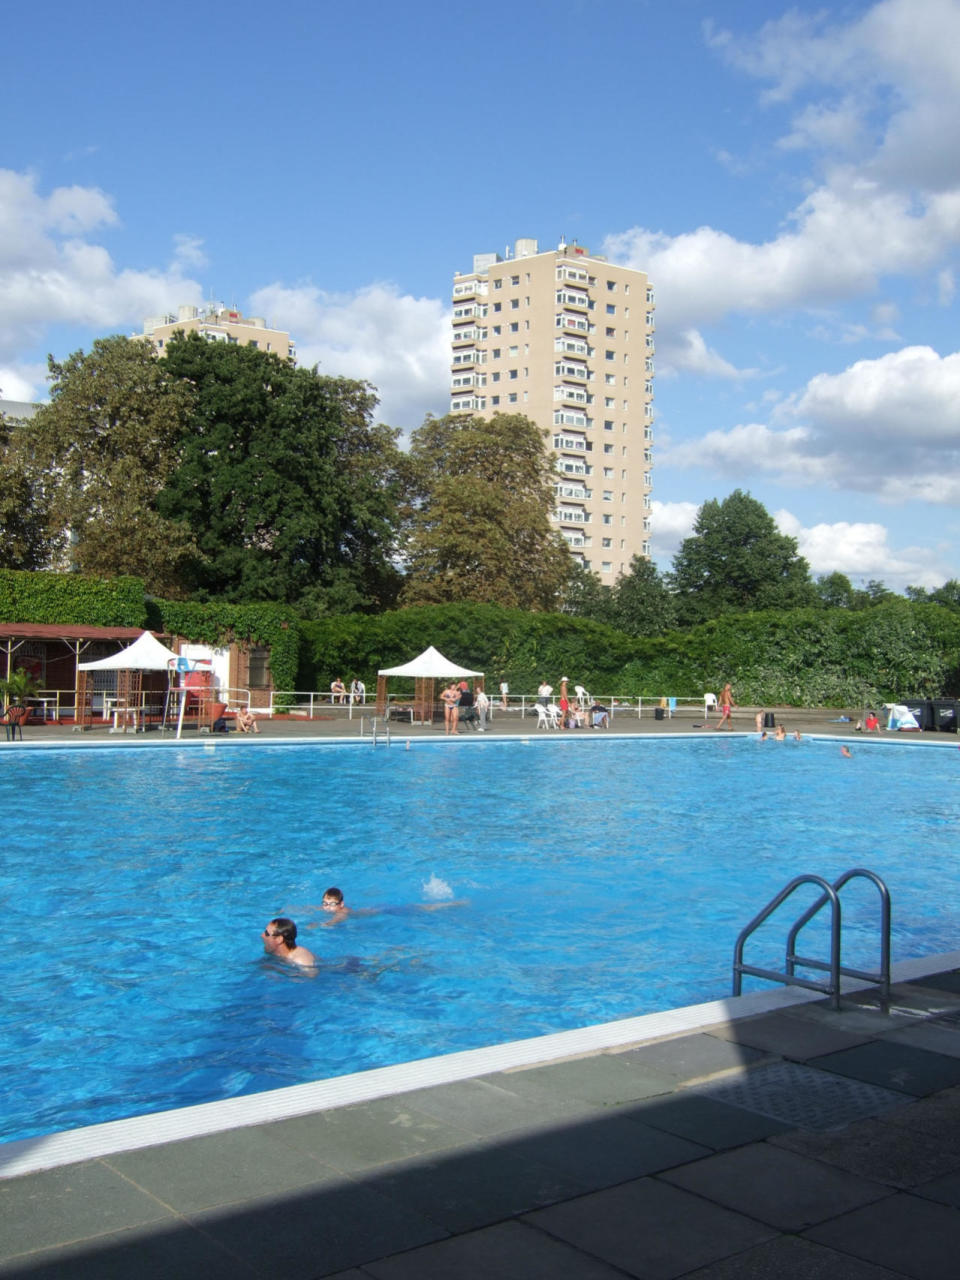 Pay a visit to Brockwell Lido